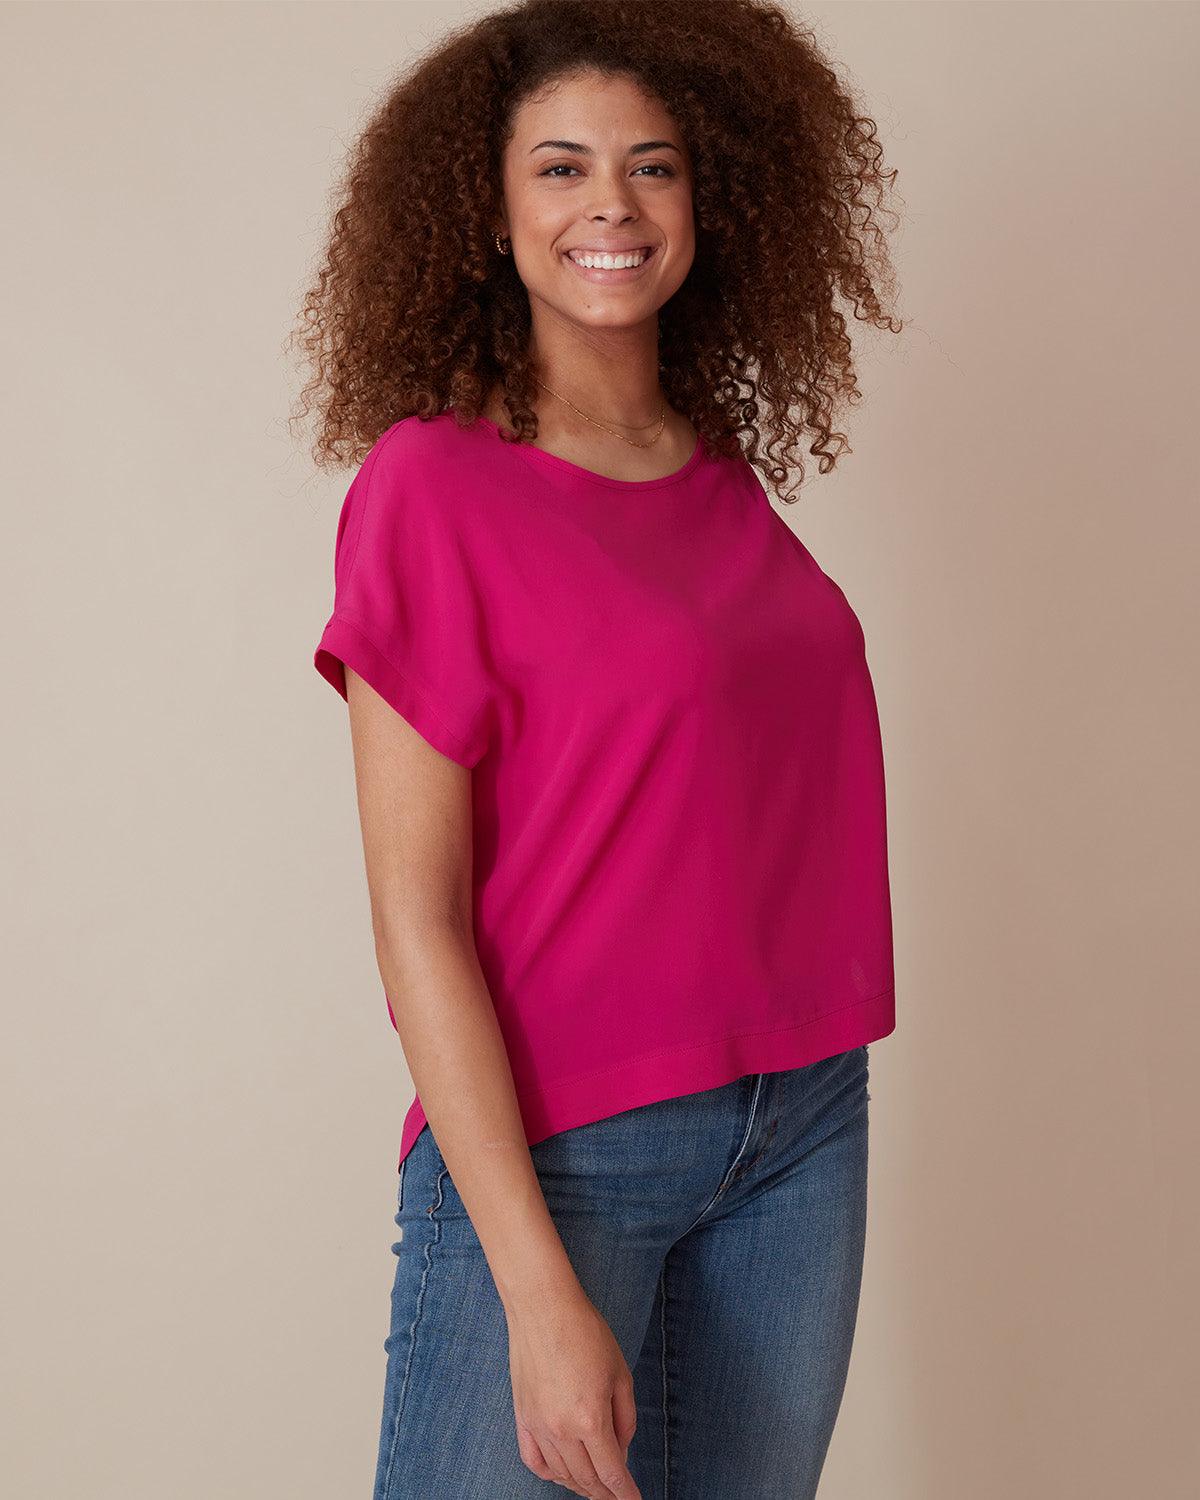 "#color_FUCHSIA|Cassandra is 5'11", wearing a size L